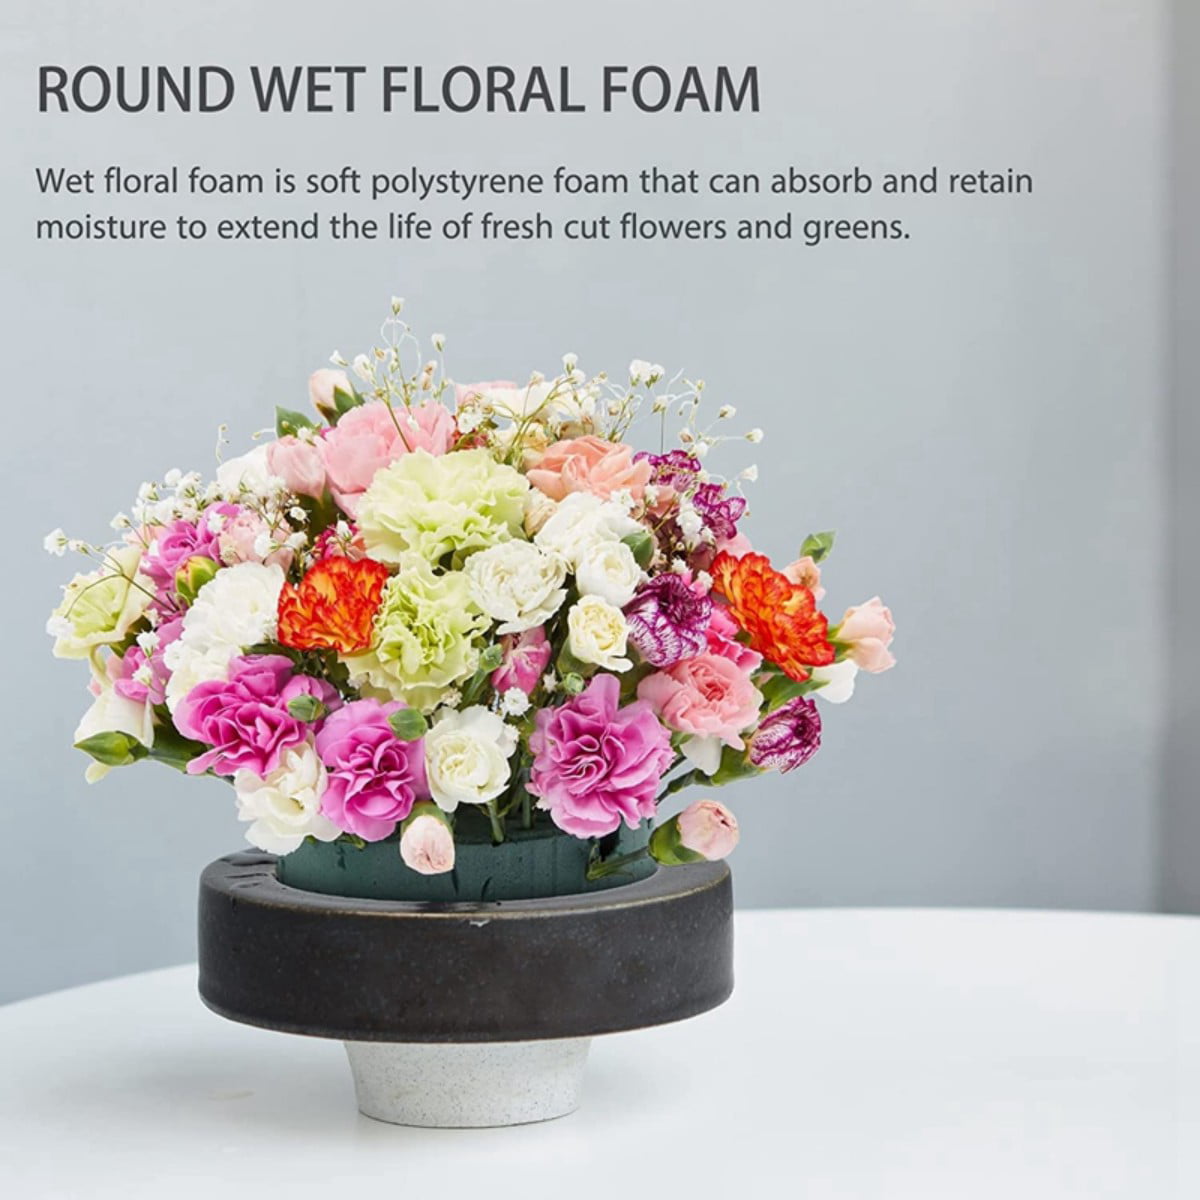 Pack of 6 FLOFARE Round Floral Foam Blocks for Fresh and Artificial Flowers,  (4.5 X 1.5), Dry & Wet Green Flower Foam for Flow